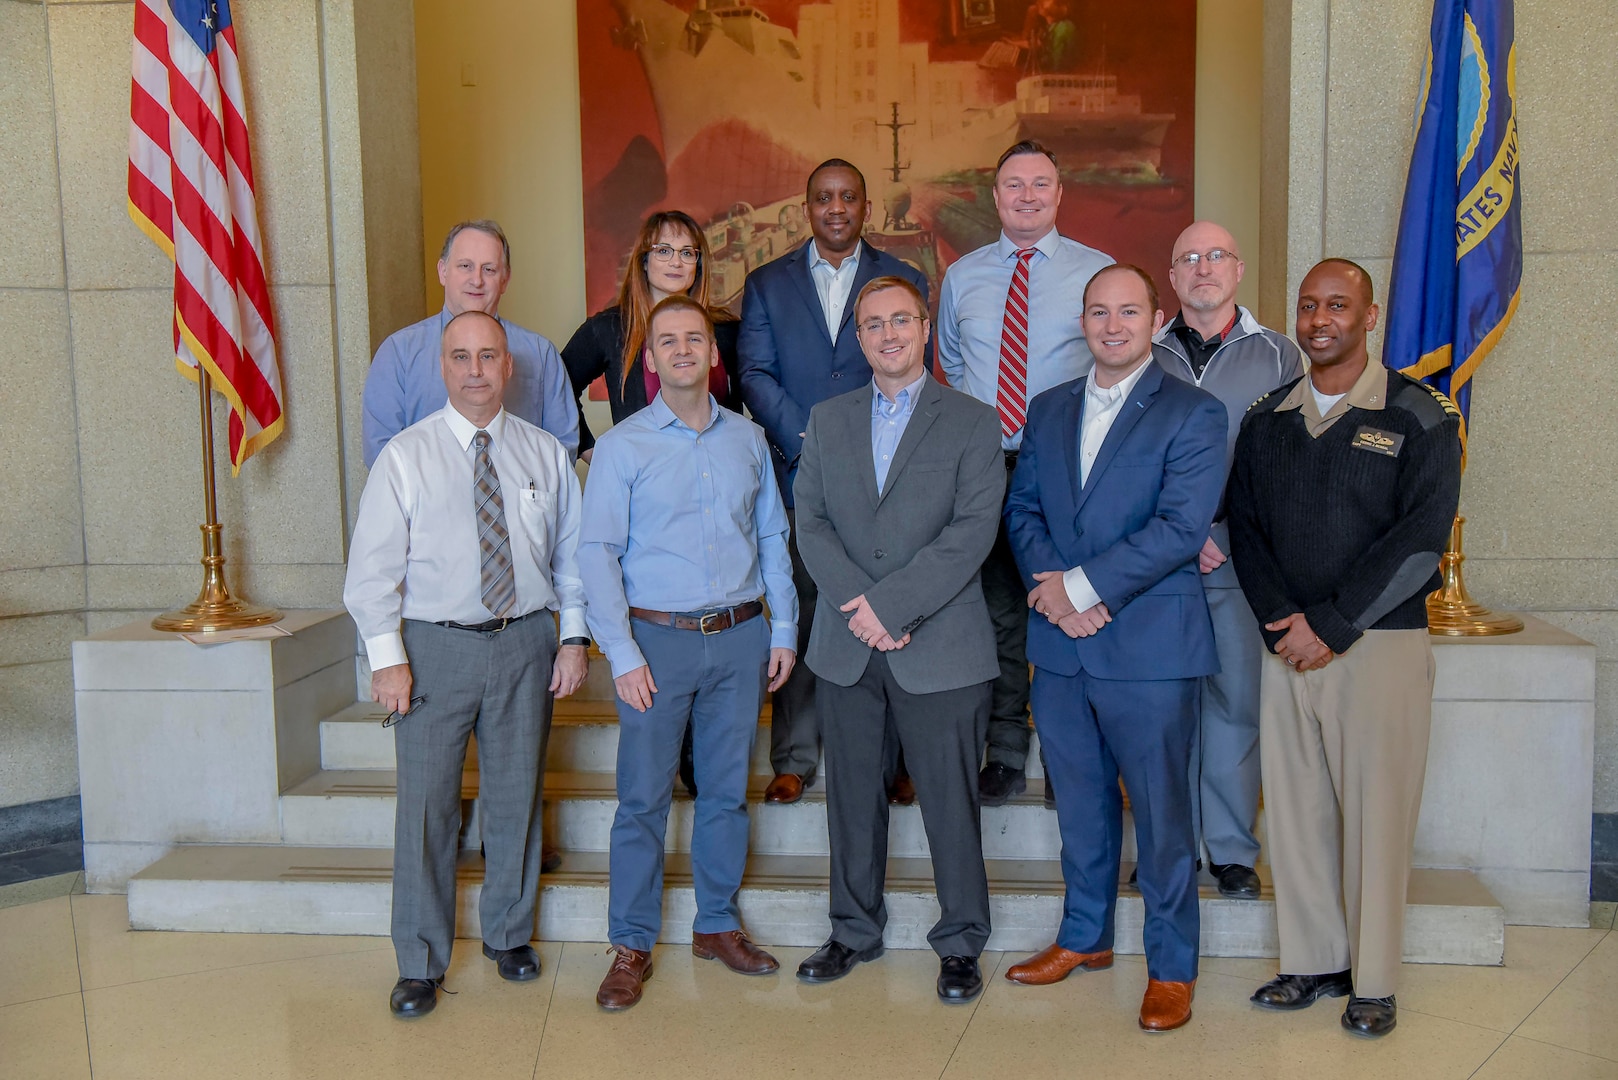 Capt. Cedric McNeal, commanding officer of Naval Surface Warfare Center Carderock Division, recognized a team of engineers from Carderock’s Platform Integrity Department on Dec. 6, 2019, for receiving the Naval Sea Systems Command Technical Authority of the Year Team Award for their contribution in addressing a critical shipbuilding challenge. From left, front row: Technical Director Larry Tarasek, Matthew Sinfield, Kevin Madala, Nate Livesy and McNeal. From left, back row: Paul Young, Maria Posada, Johnnie DeLoach, Charles Roe and Jeff Mercier. (U.S. Navy photo by Harry Friedman/Released)